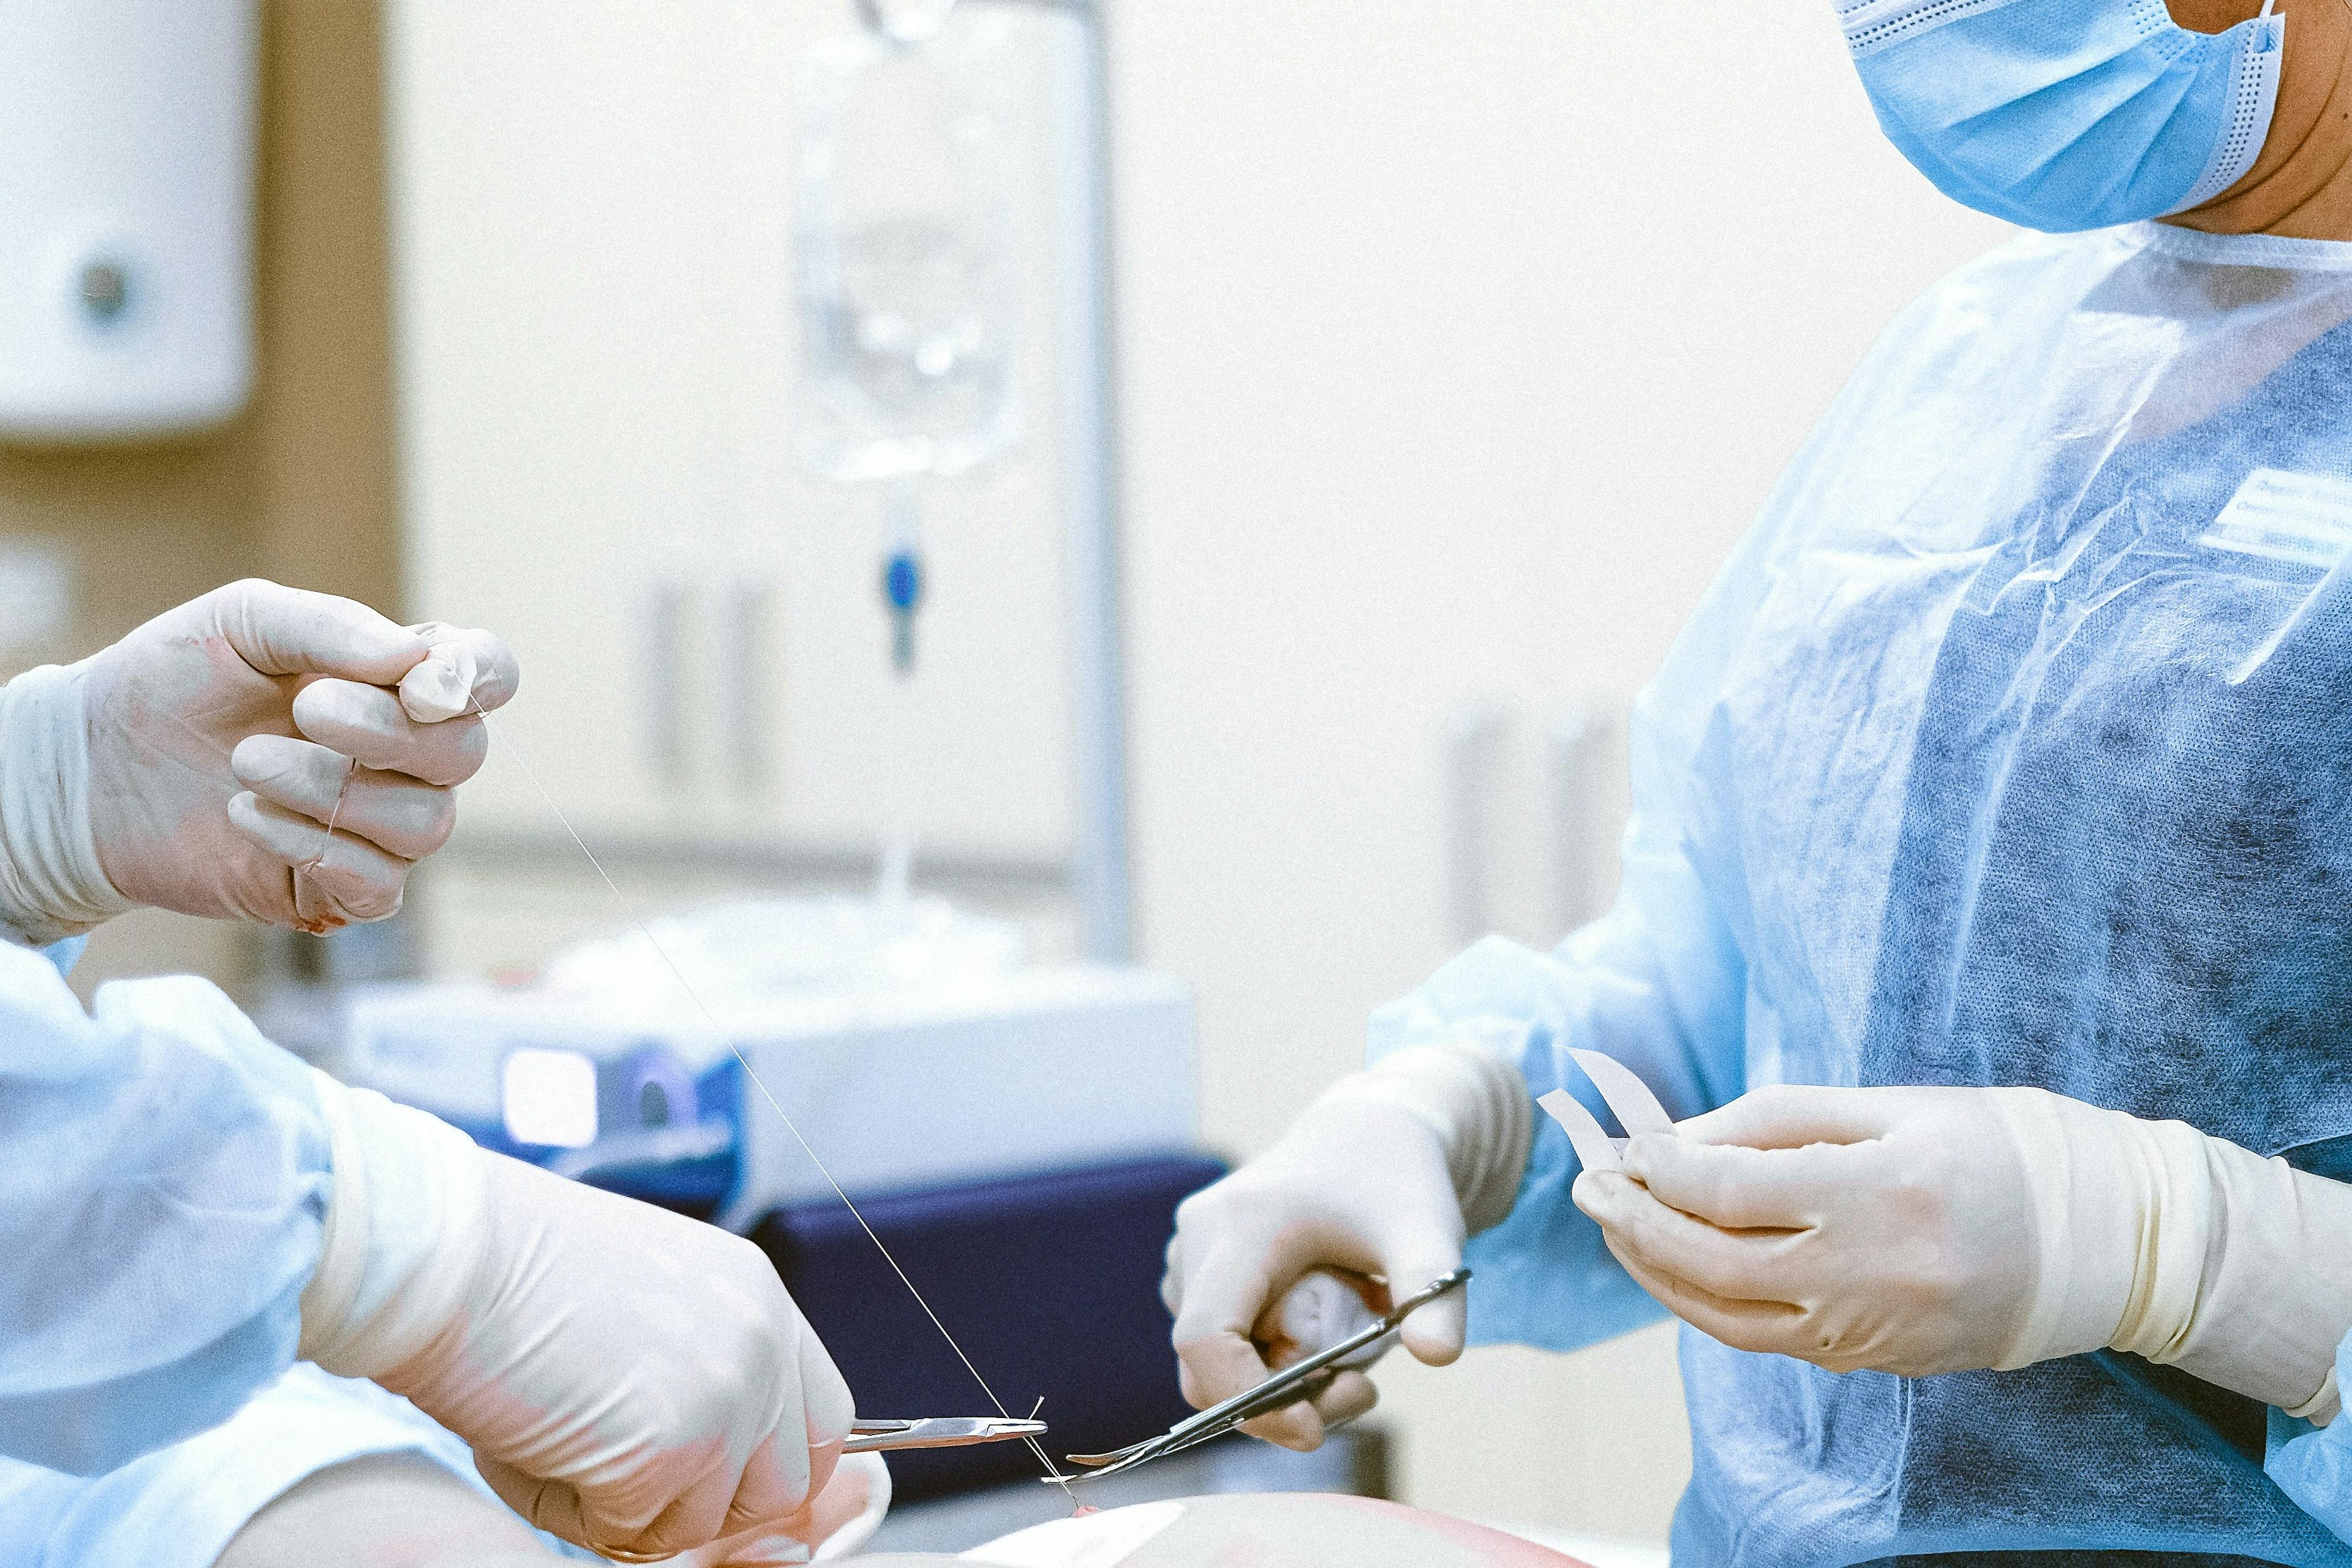 Better outcomes when gyn oncs are trained to perform upper abdominal surgeries